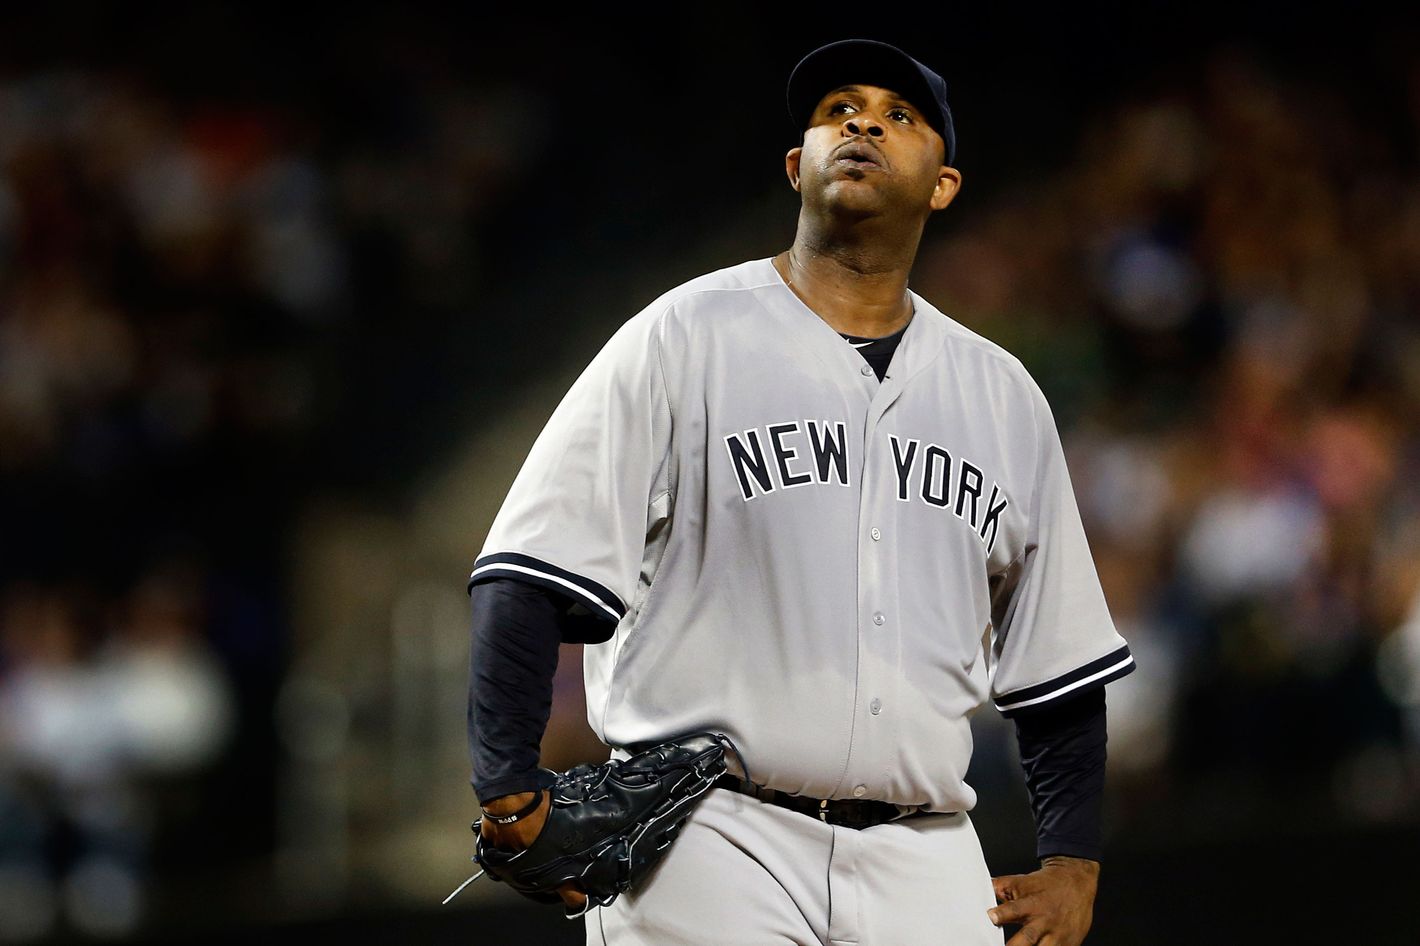 On Eve of Playoffs, CC Sabathia Is Checking Himself Into Rehab